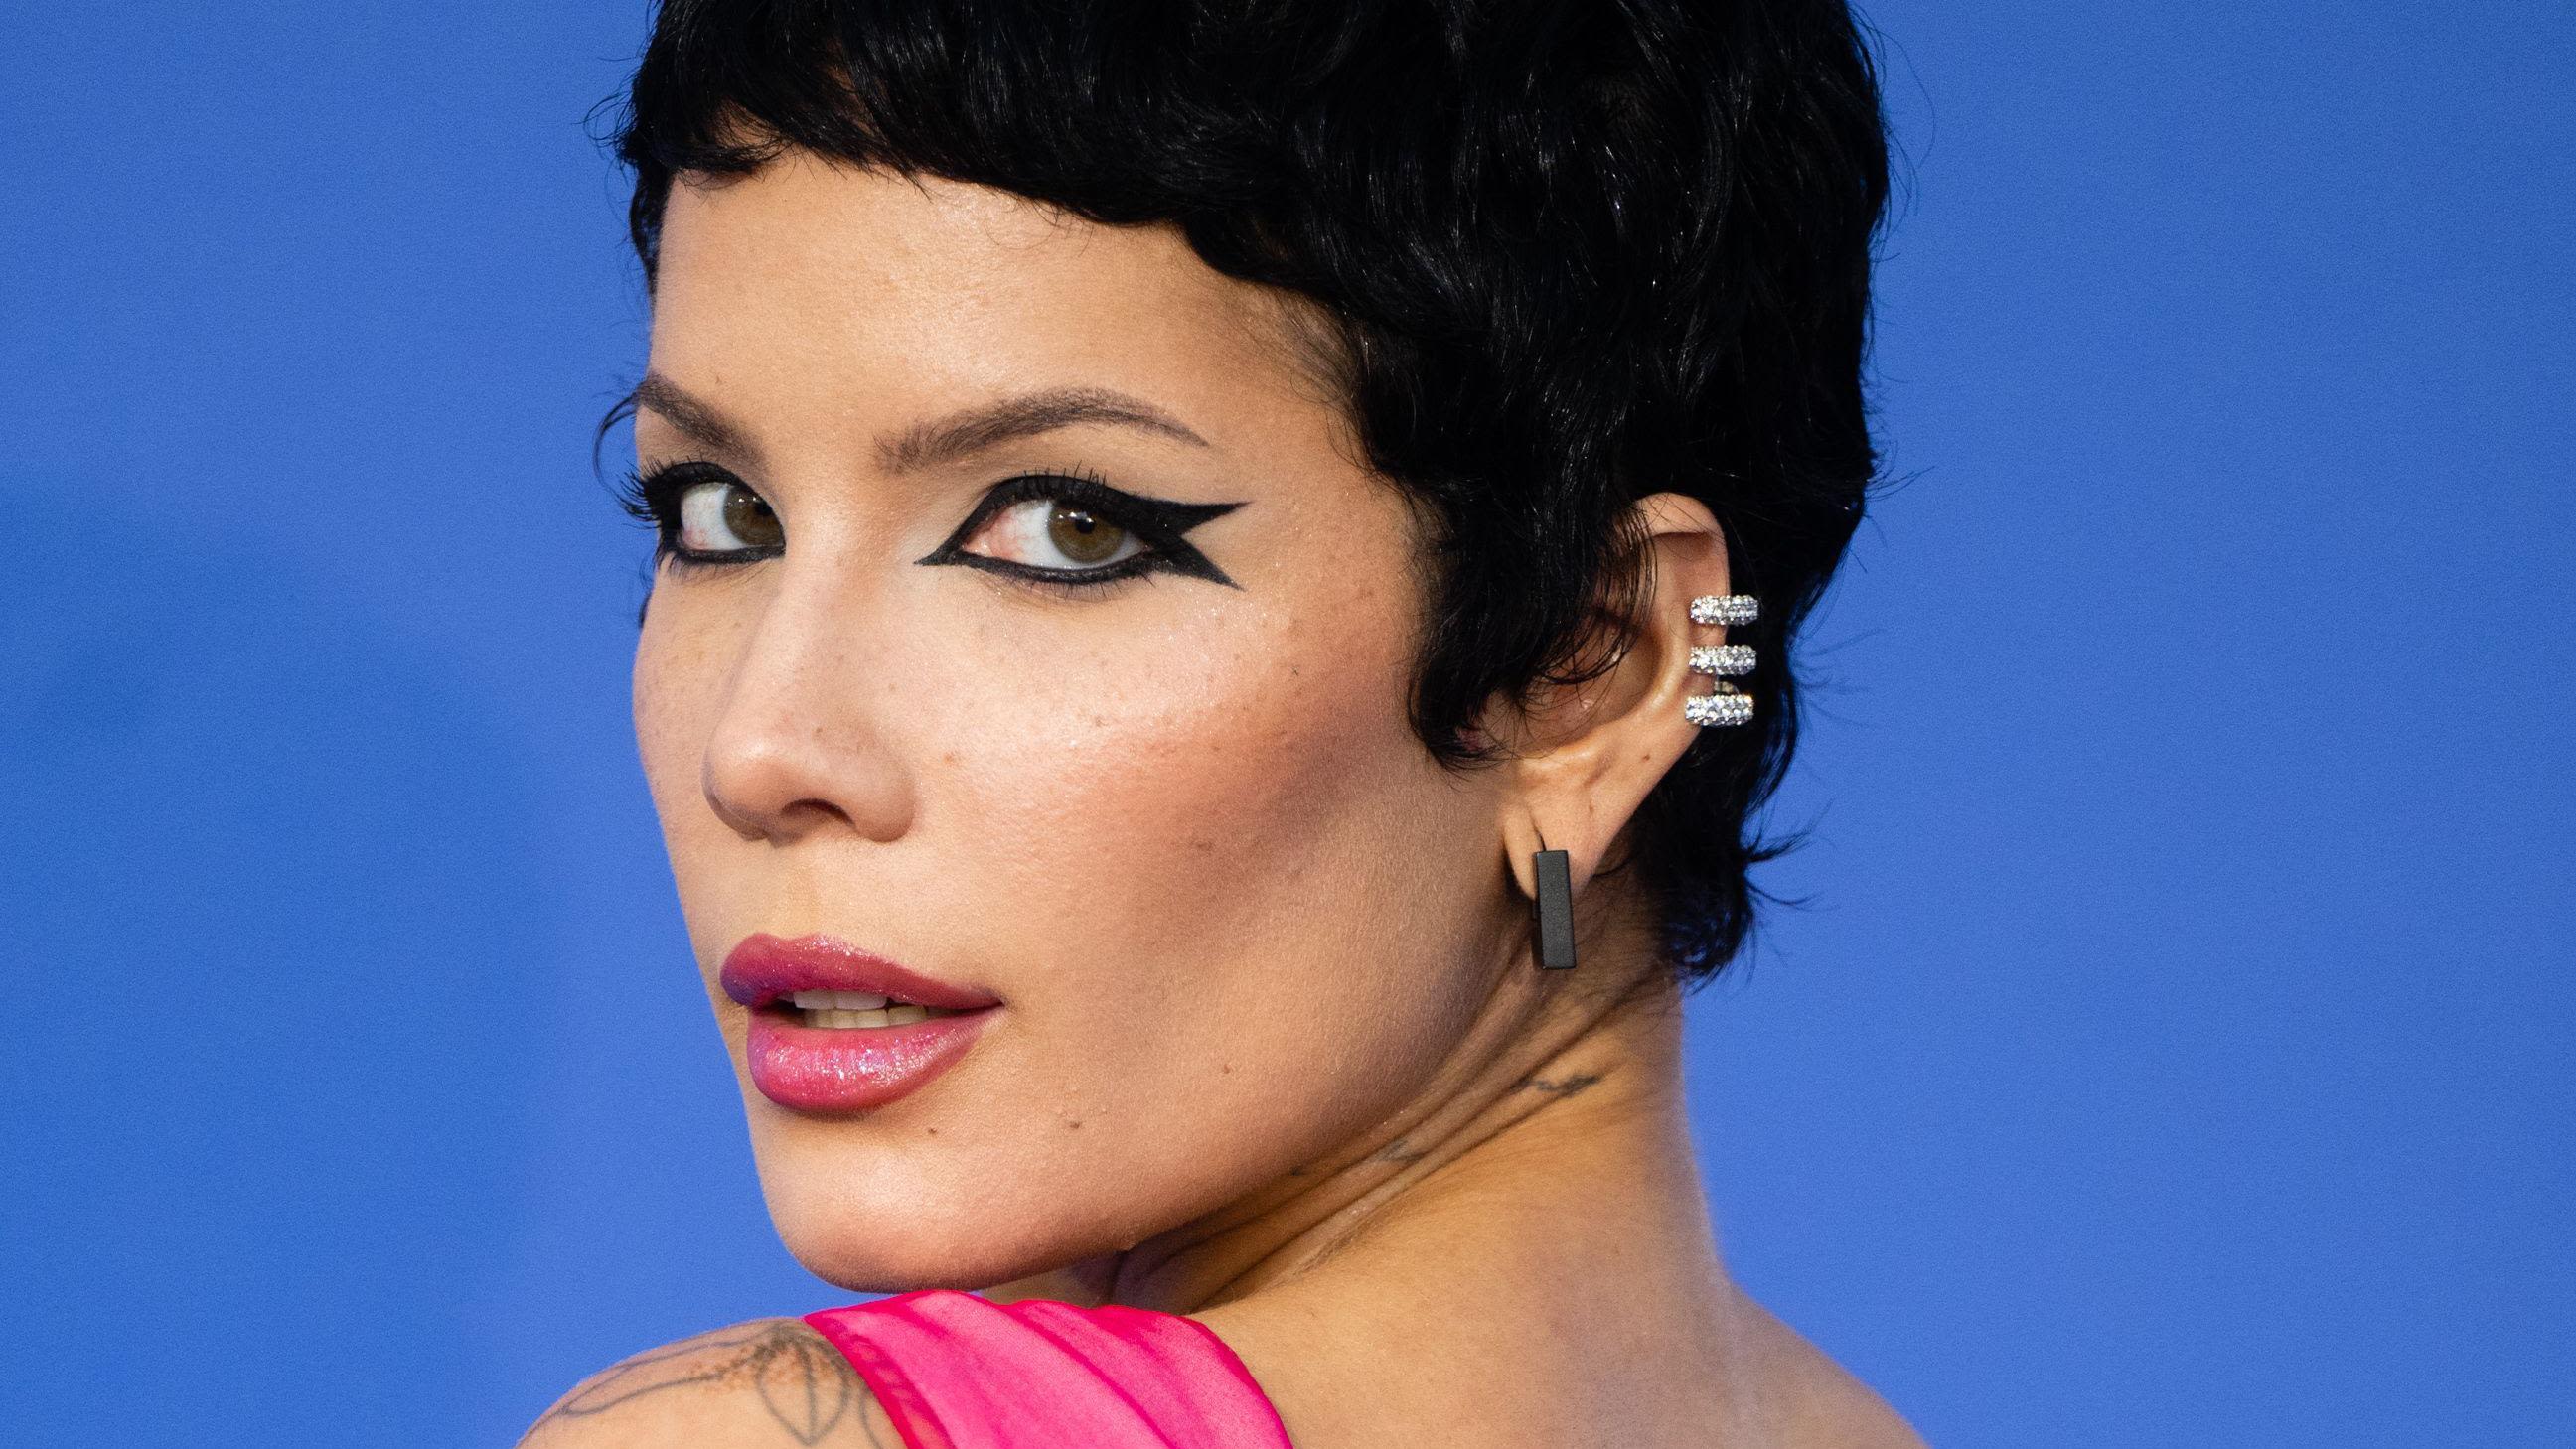 Halsey 'lucky to be alive' after health struggles